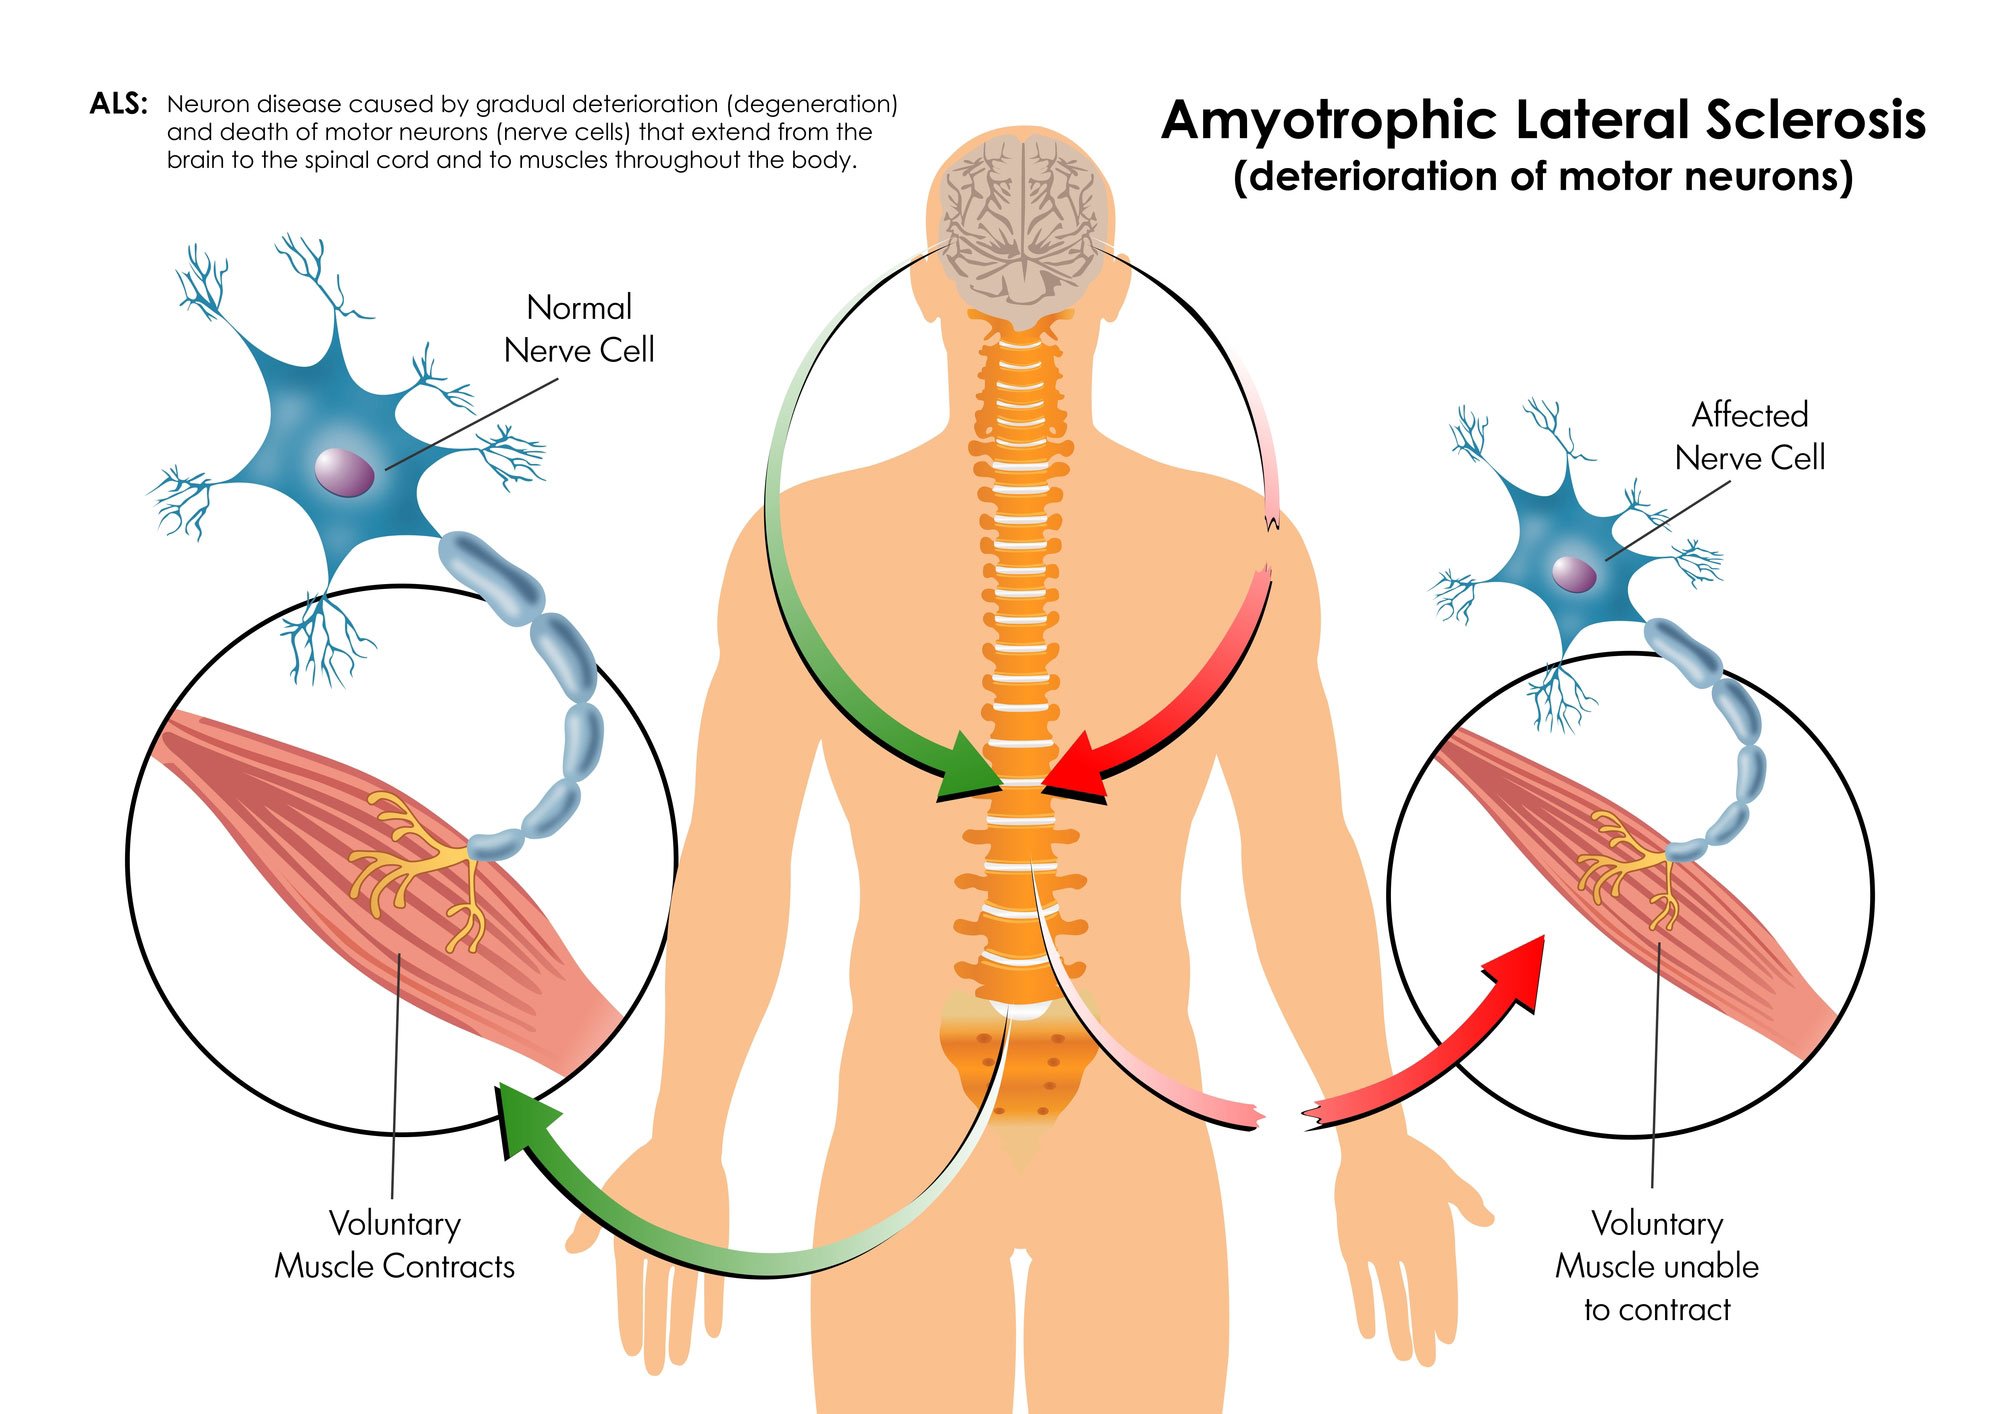 There are many forms of motor neuron disease, a common one being amyotrophic lateral sclerosis (ALS)